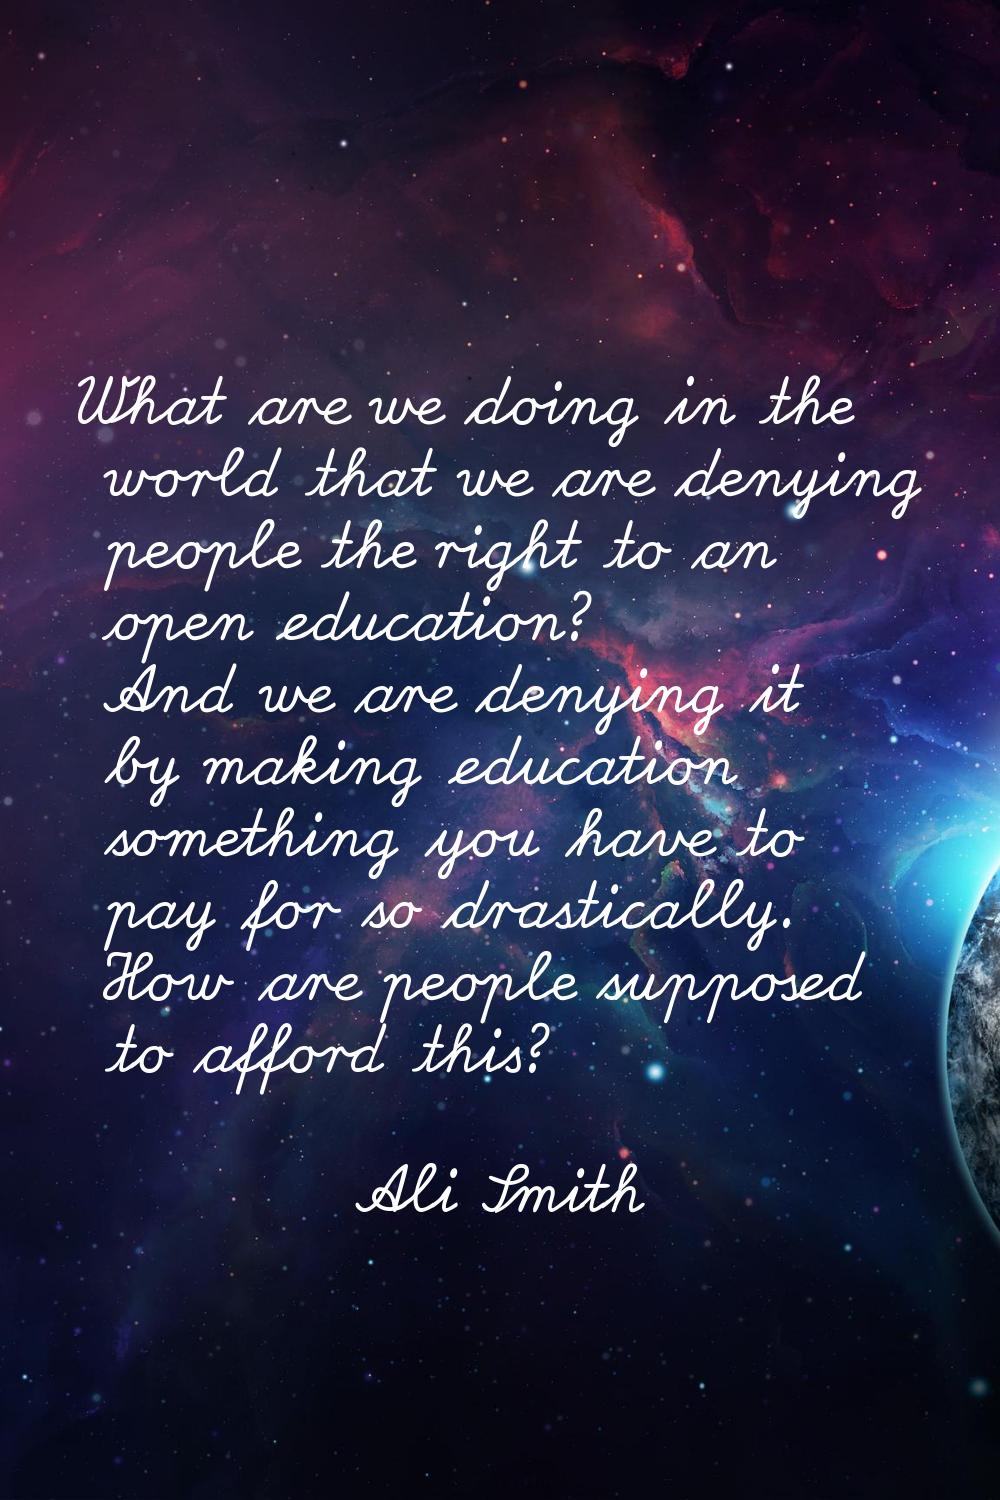 What are we doing in the world that we are denying people the right to an open education? And we ar